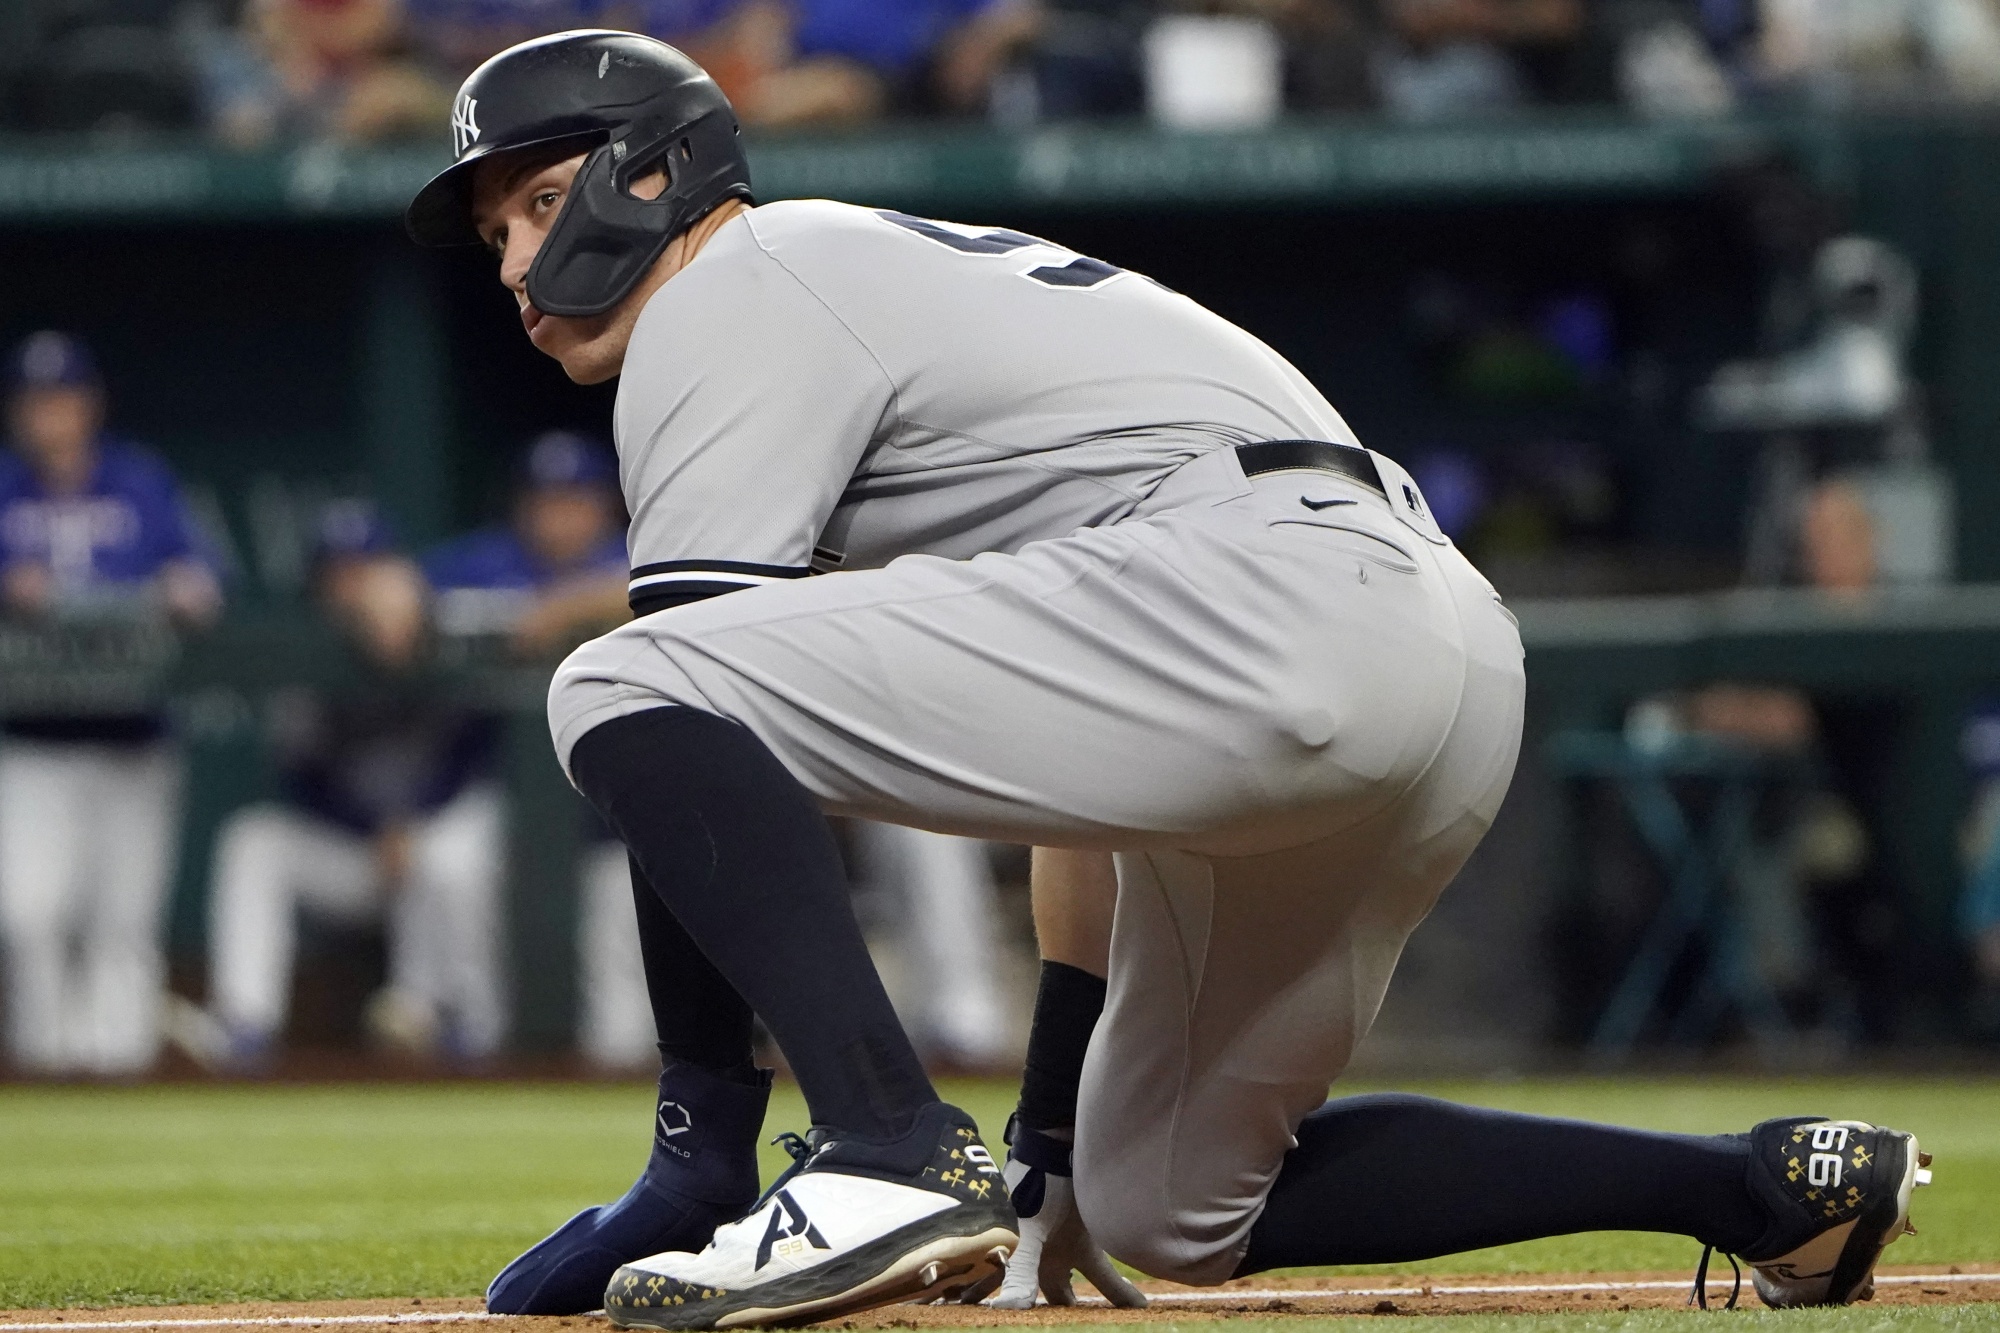 Aaron Judge Blasts 62nd Home Run, Sets Yankees, A.L. Record!